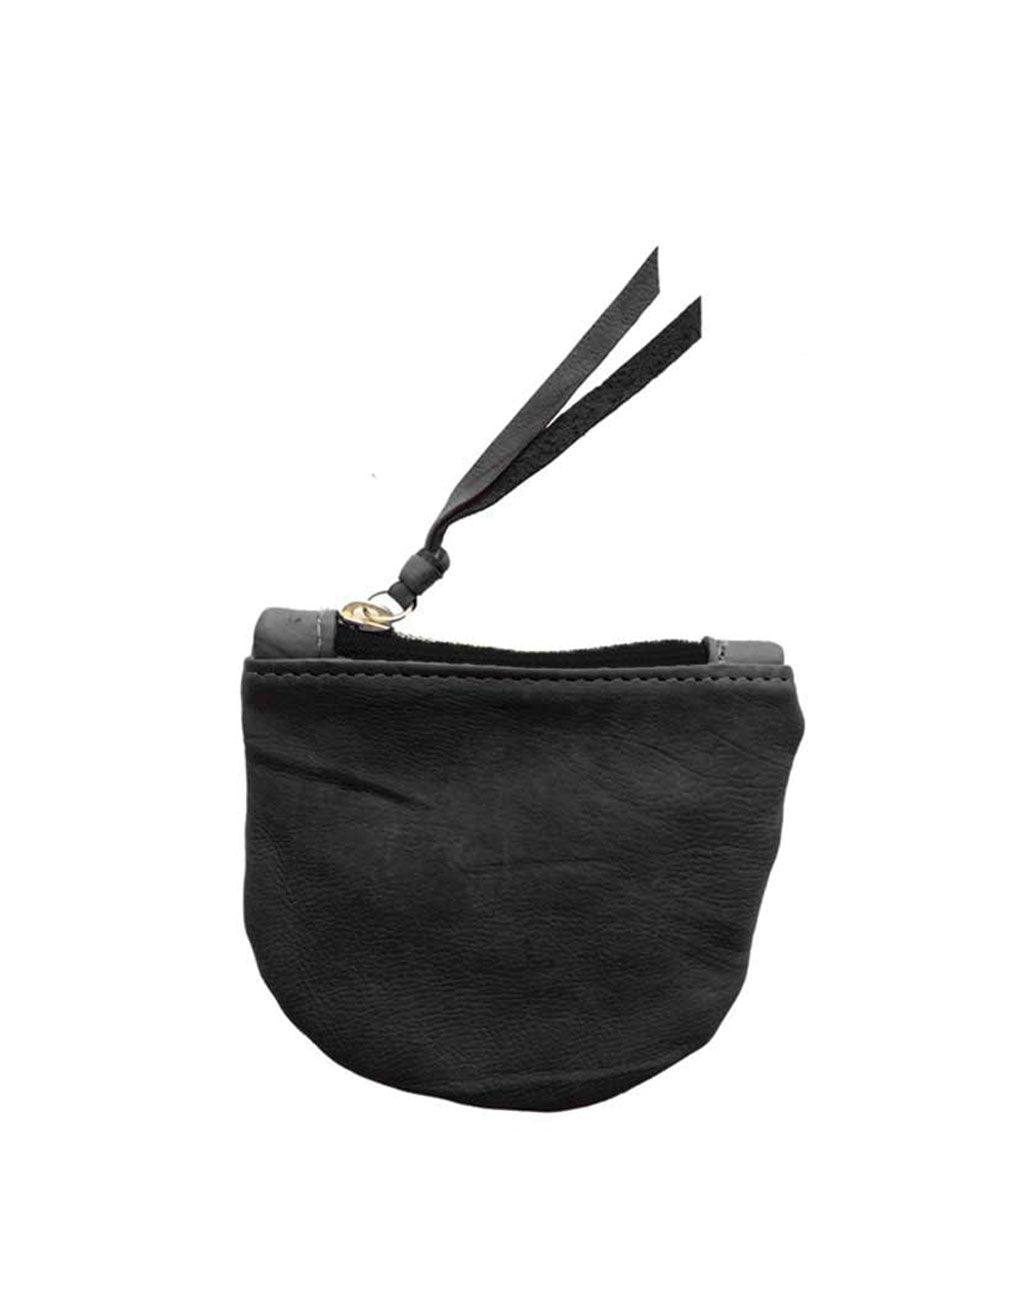 Half Moon Leather Pouch - Black